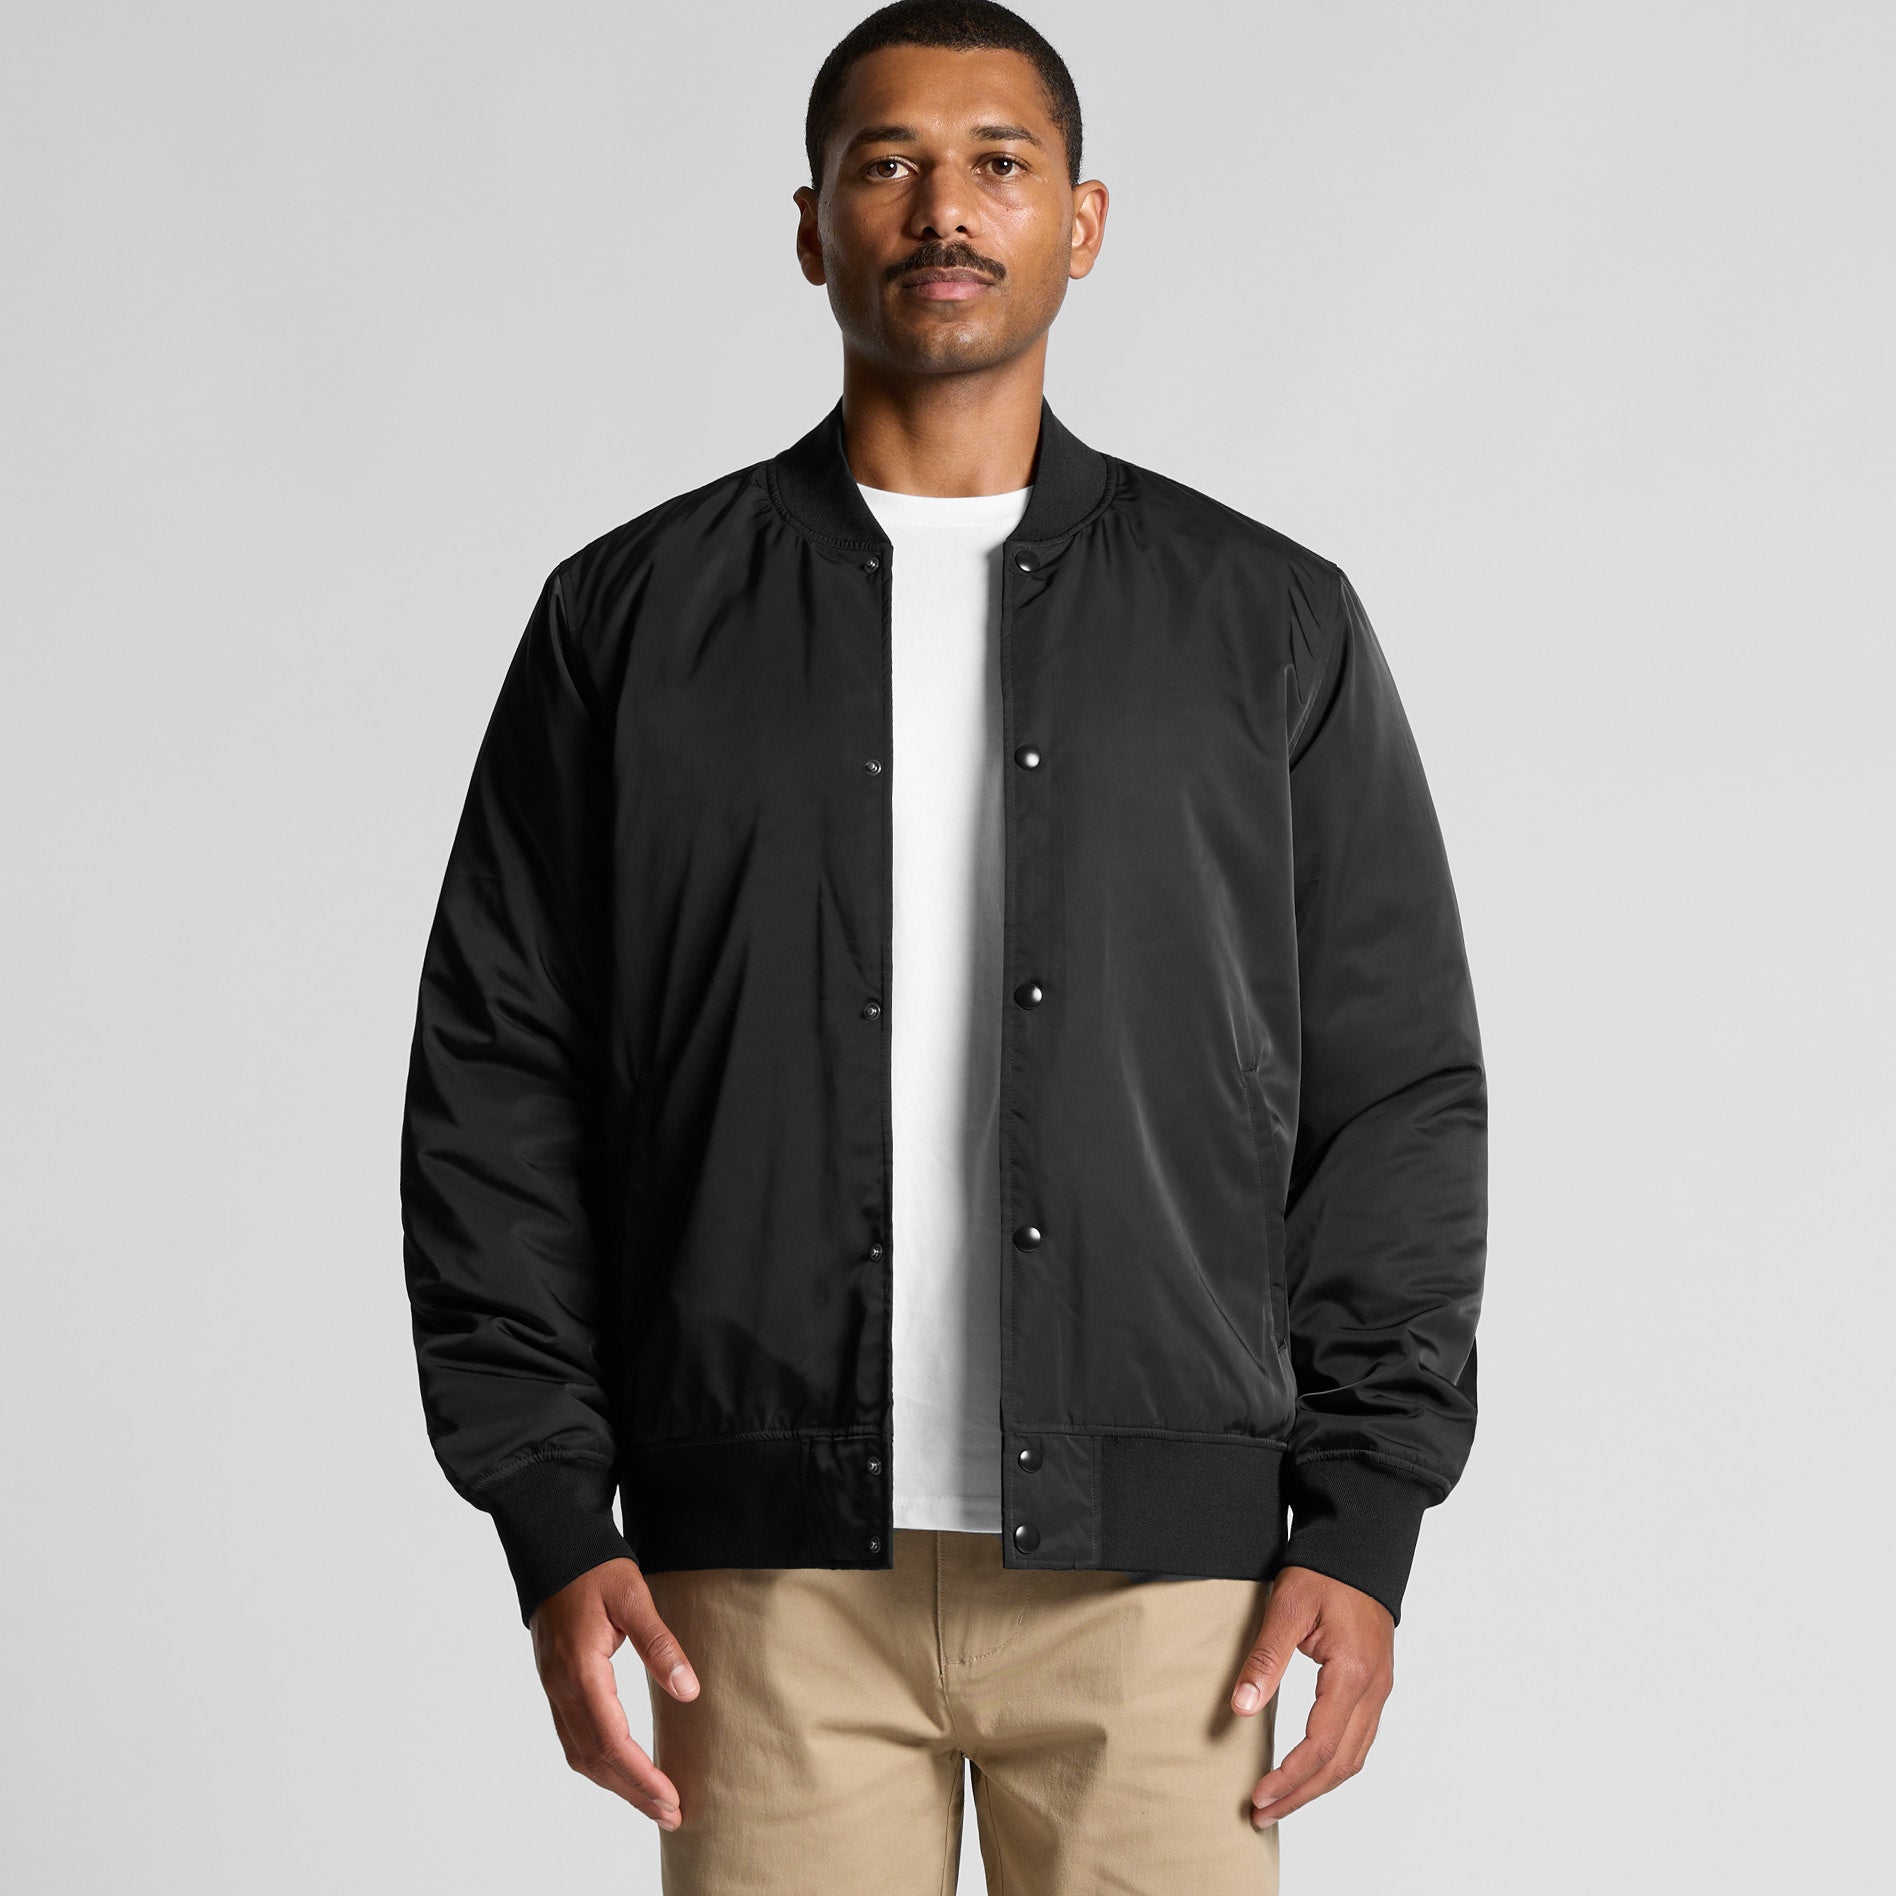 AS Colour Mens College Bomber Jacket